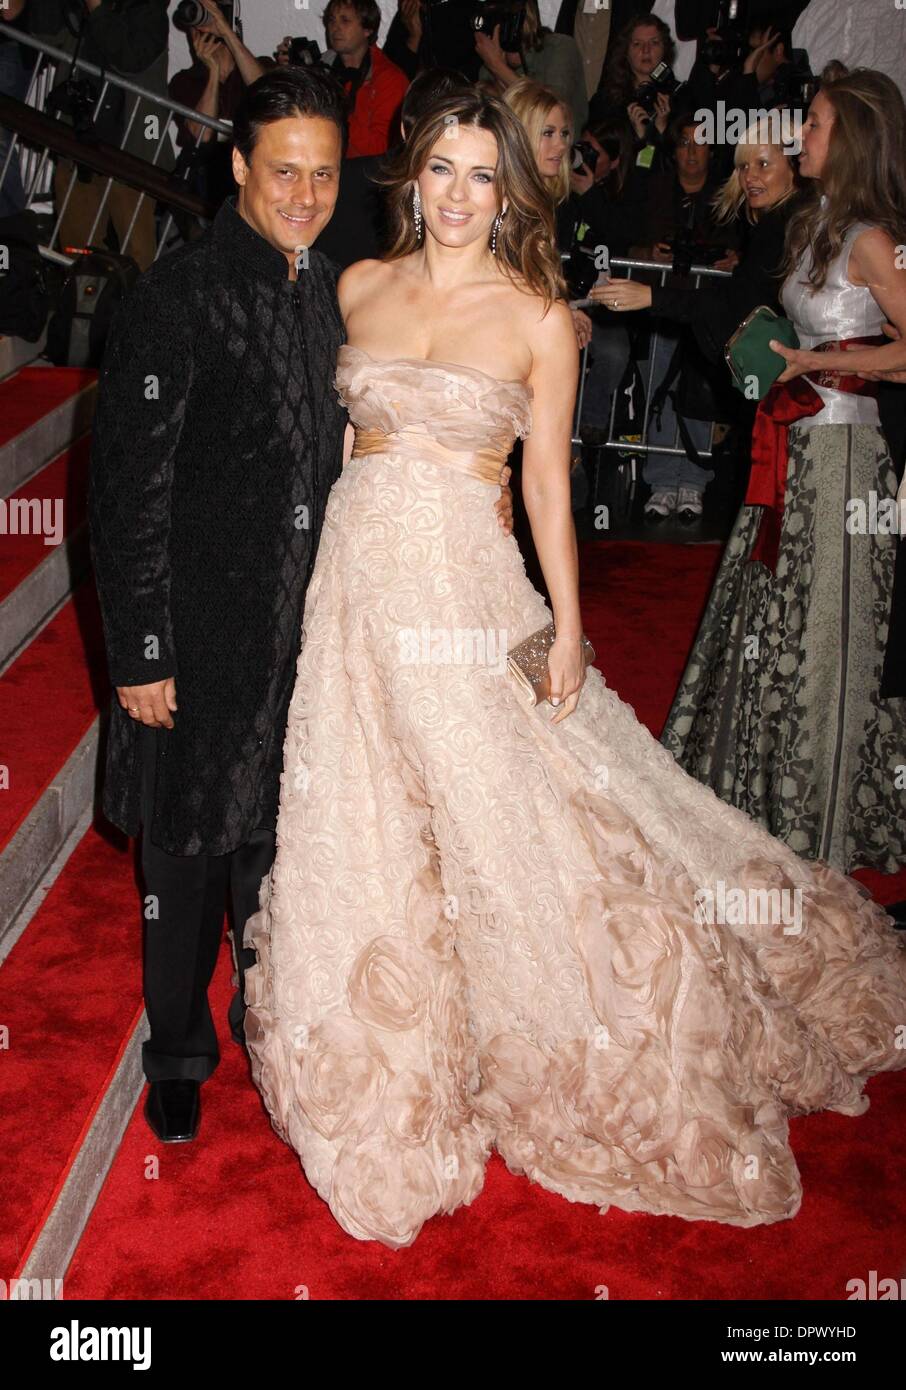 May 04, 2009 - New York, New York, USA - LIZ HURLEY and ARUN NAYAR attend the Costume Institute Gala opening of 'The Model as Muse: Embodying Fashion' held at the Metropolitan Museum of Art. (Credit Image: Â© Nancy Kaszerman/ZUMA Press) Stock Photo